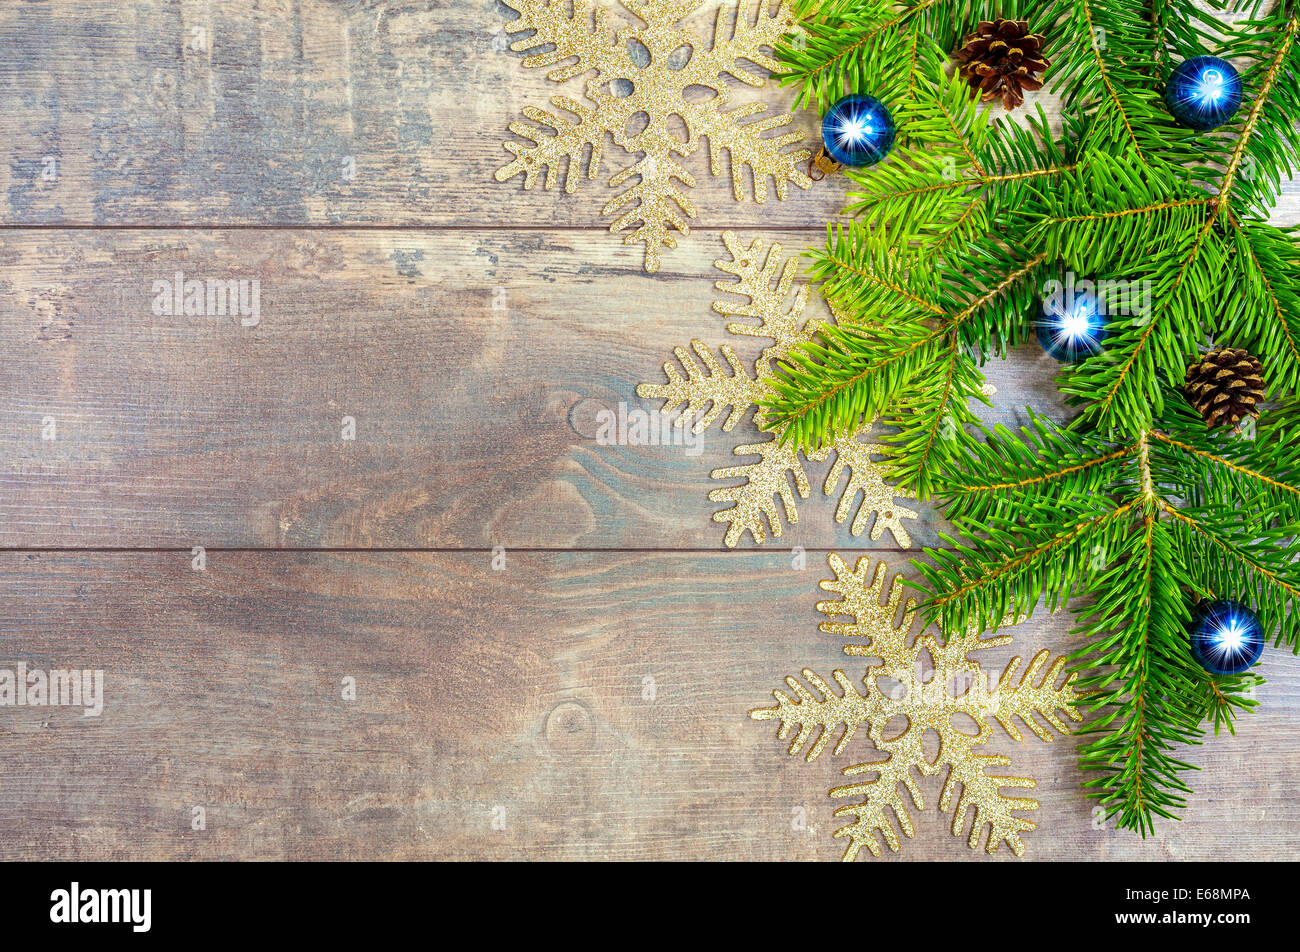 Christmas background, decoration on a rustic wooden board. Stock Photo